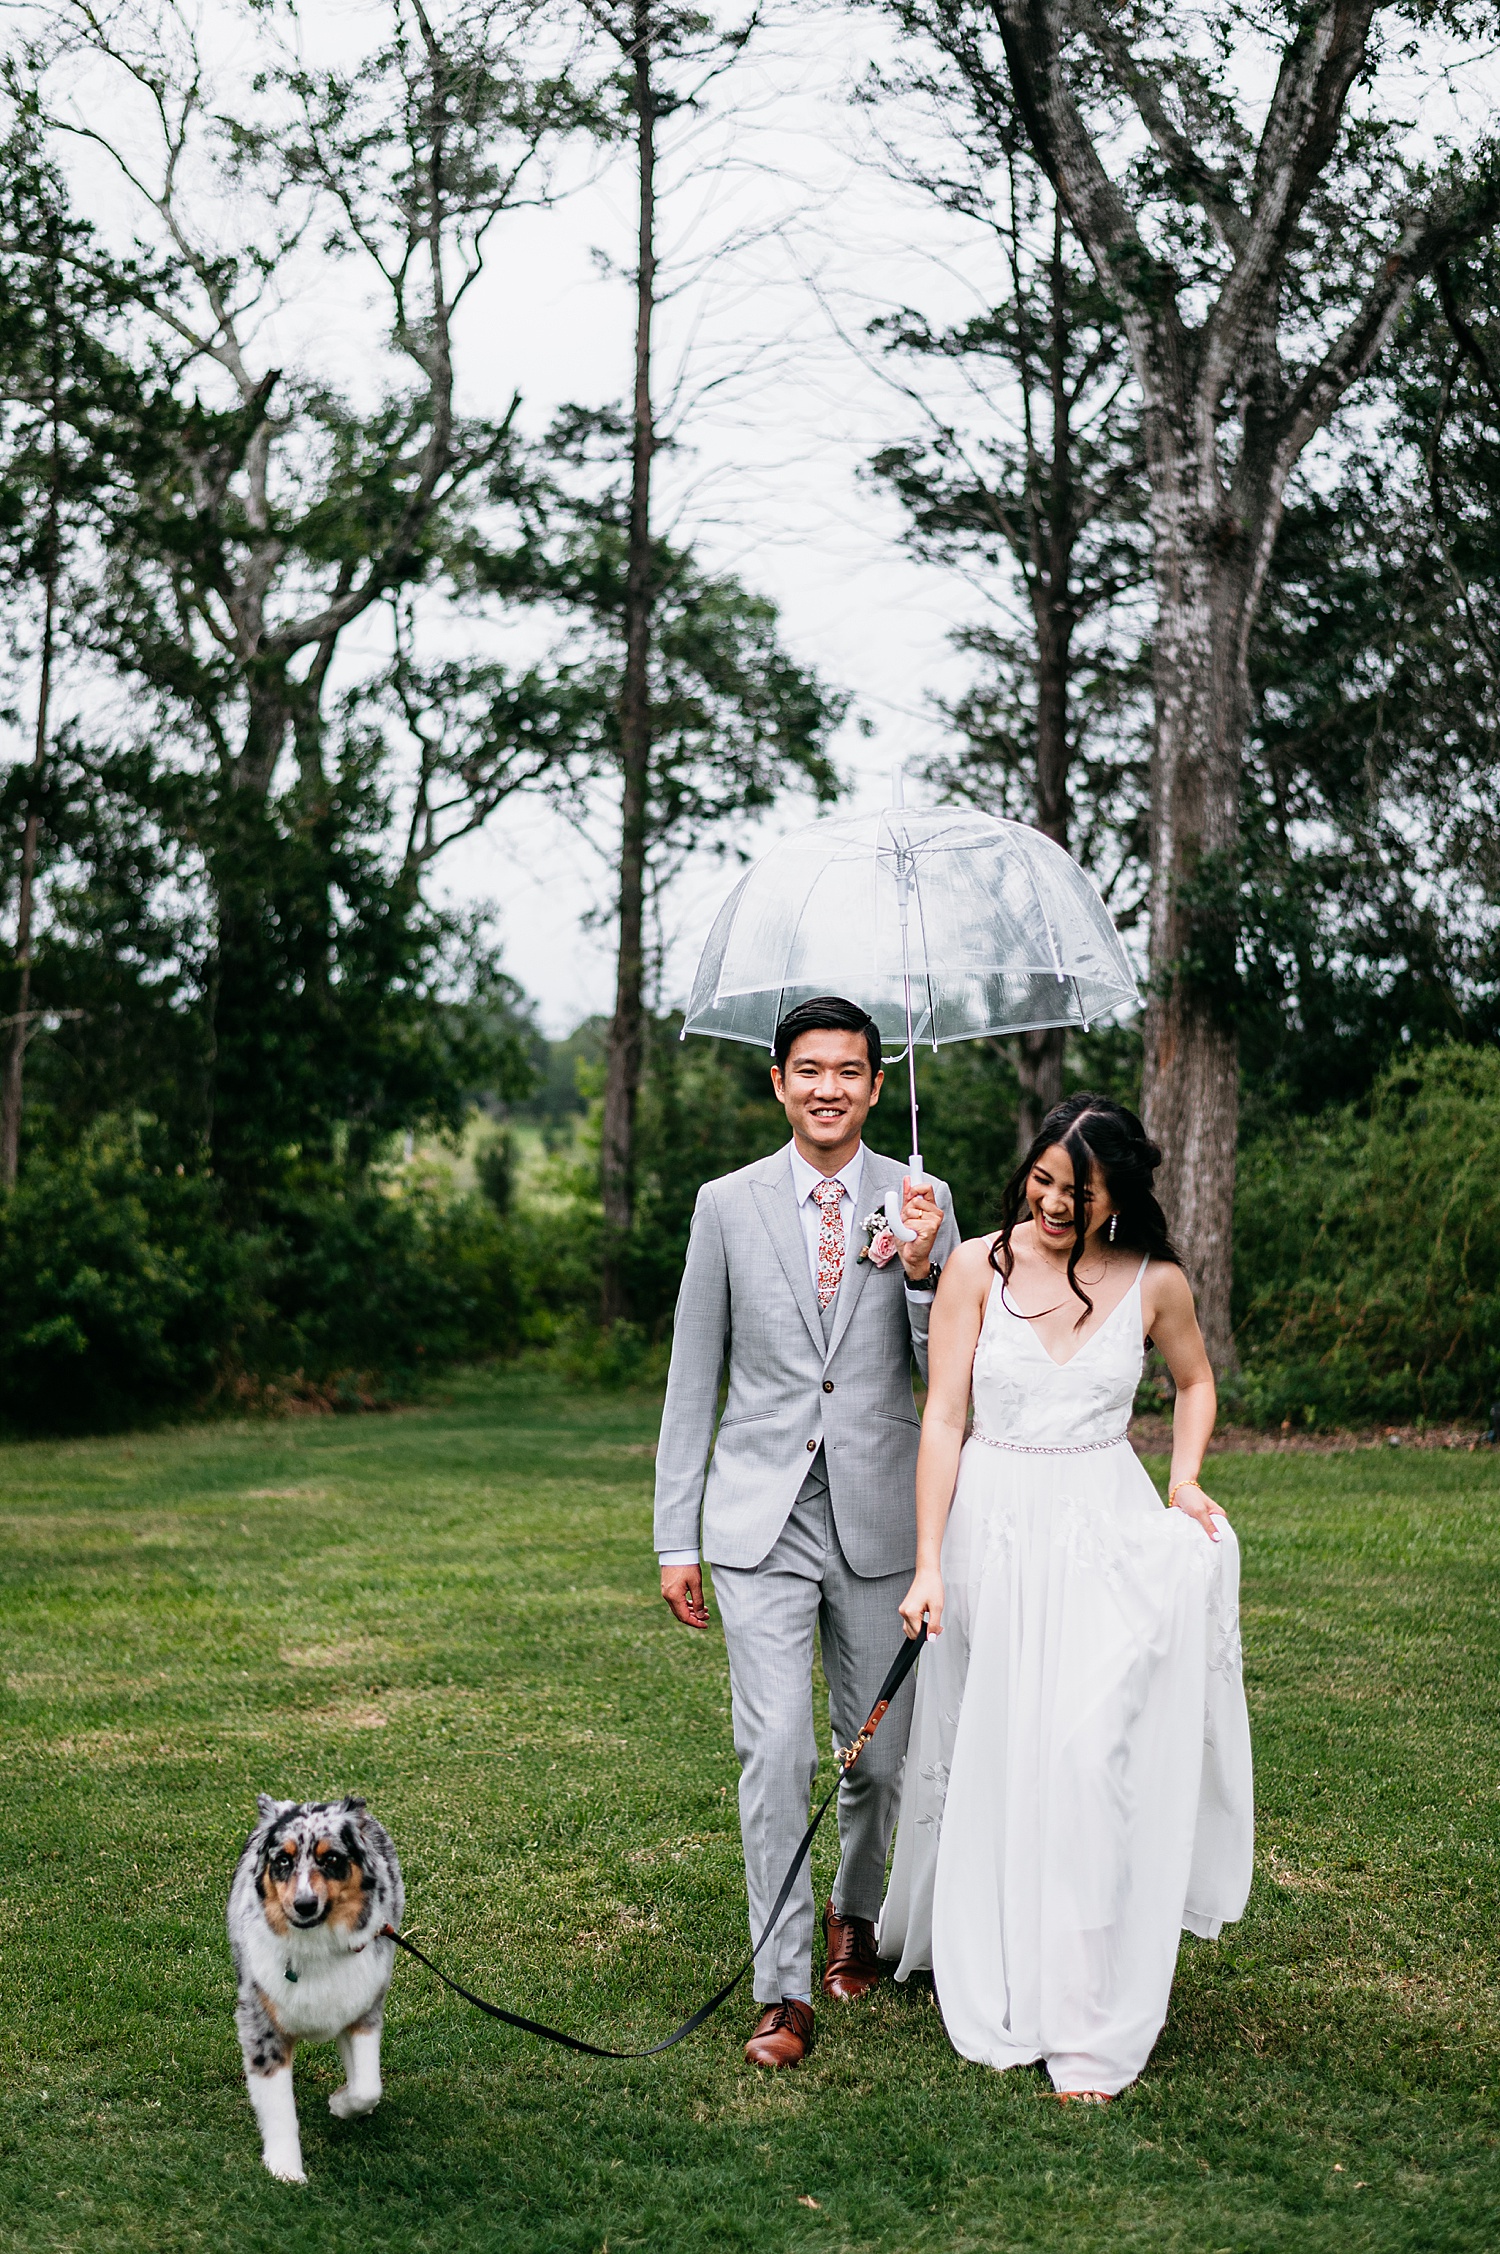 Bride and groom holding clear umbrella walking their dog.